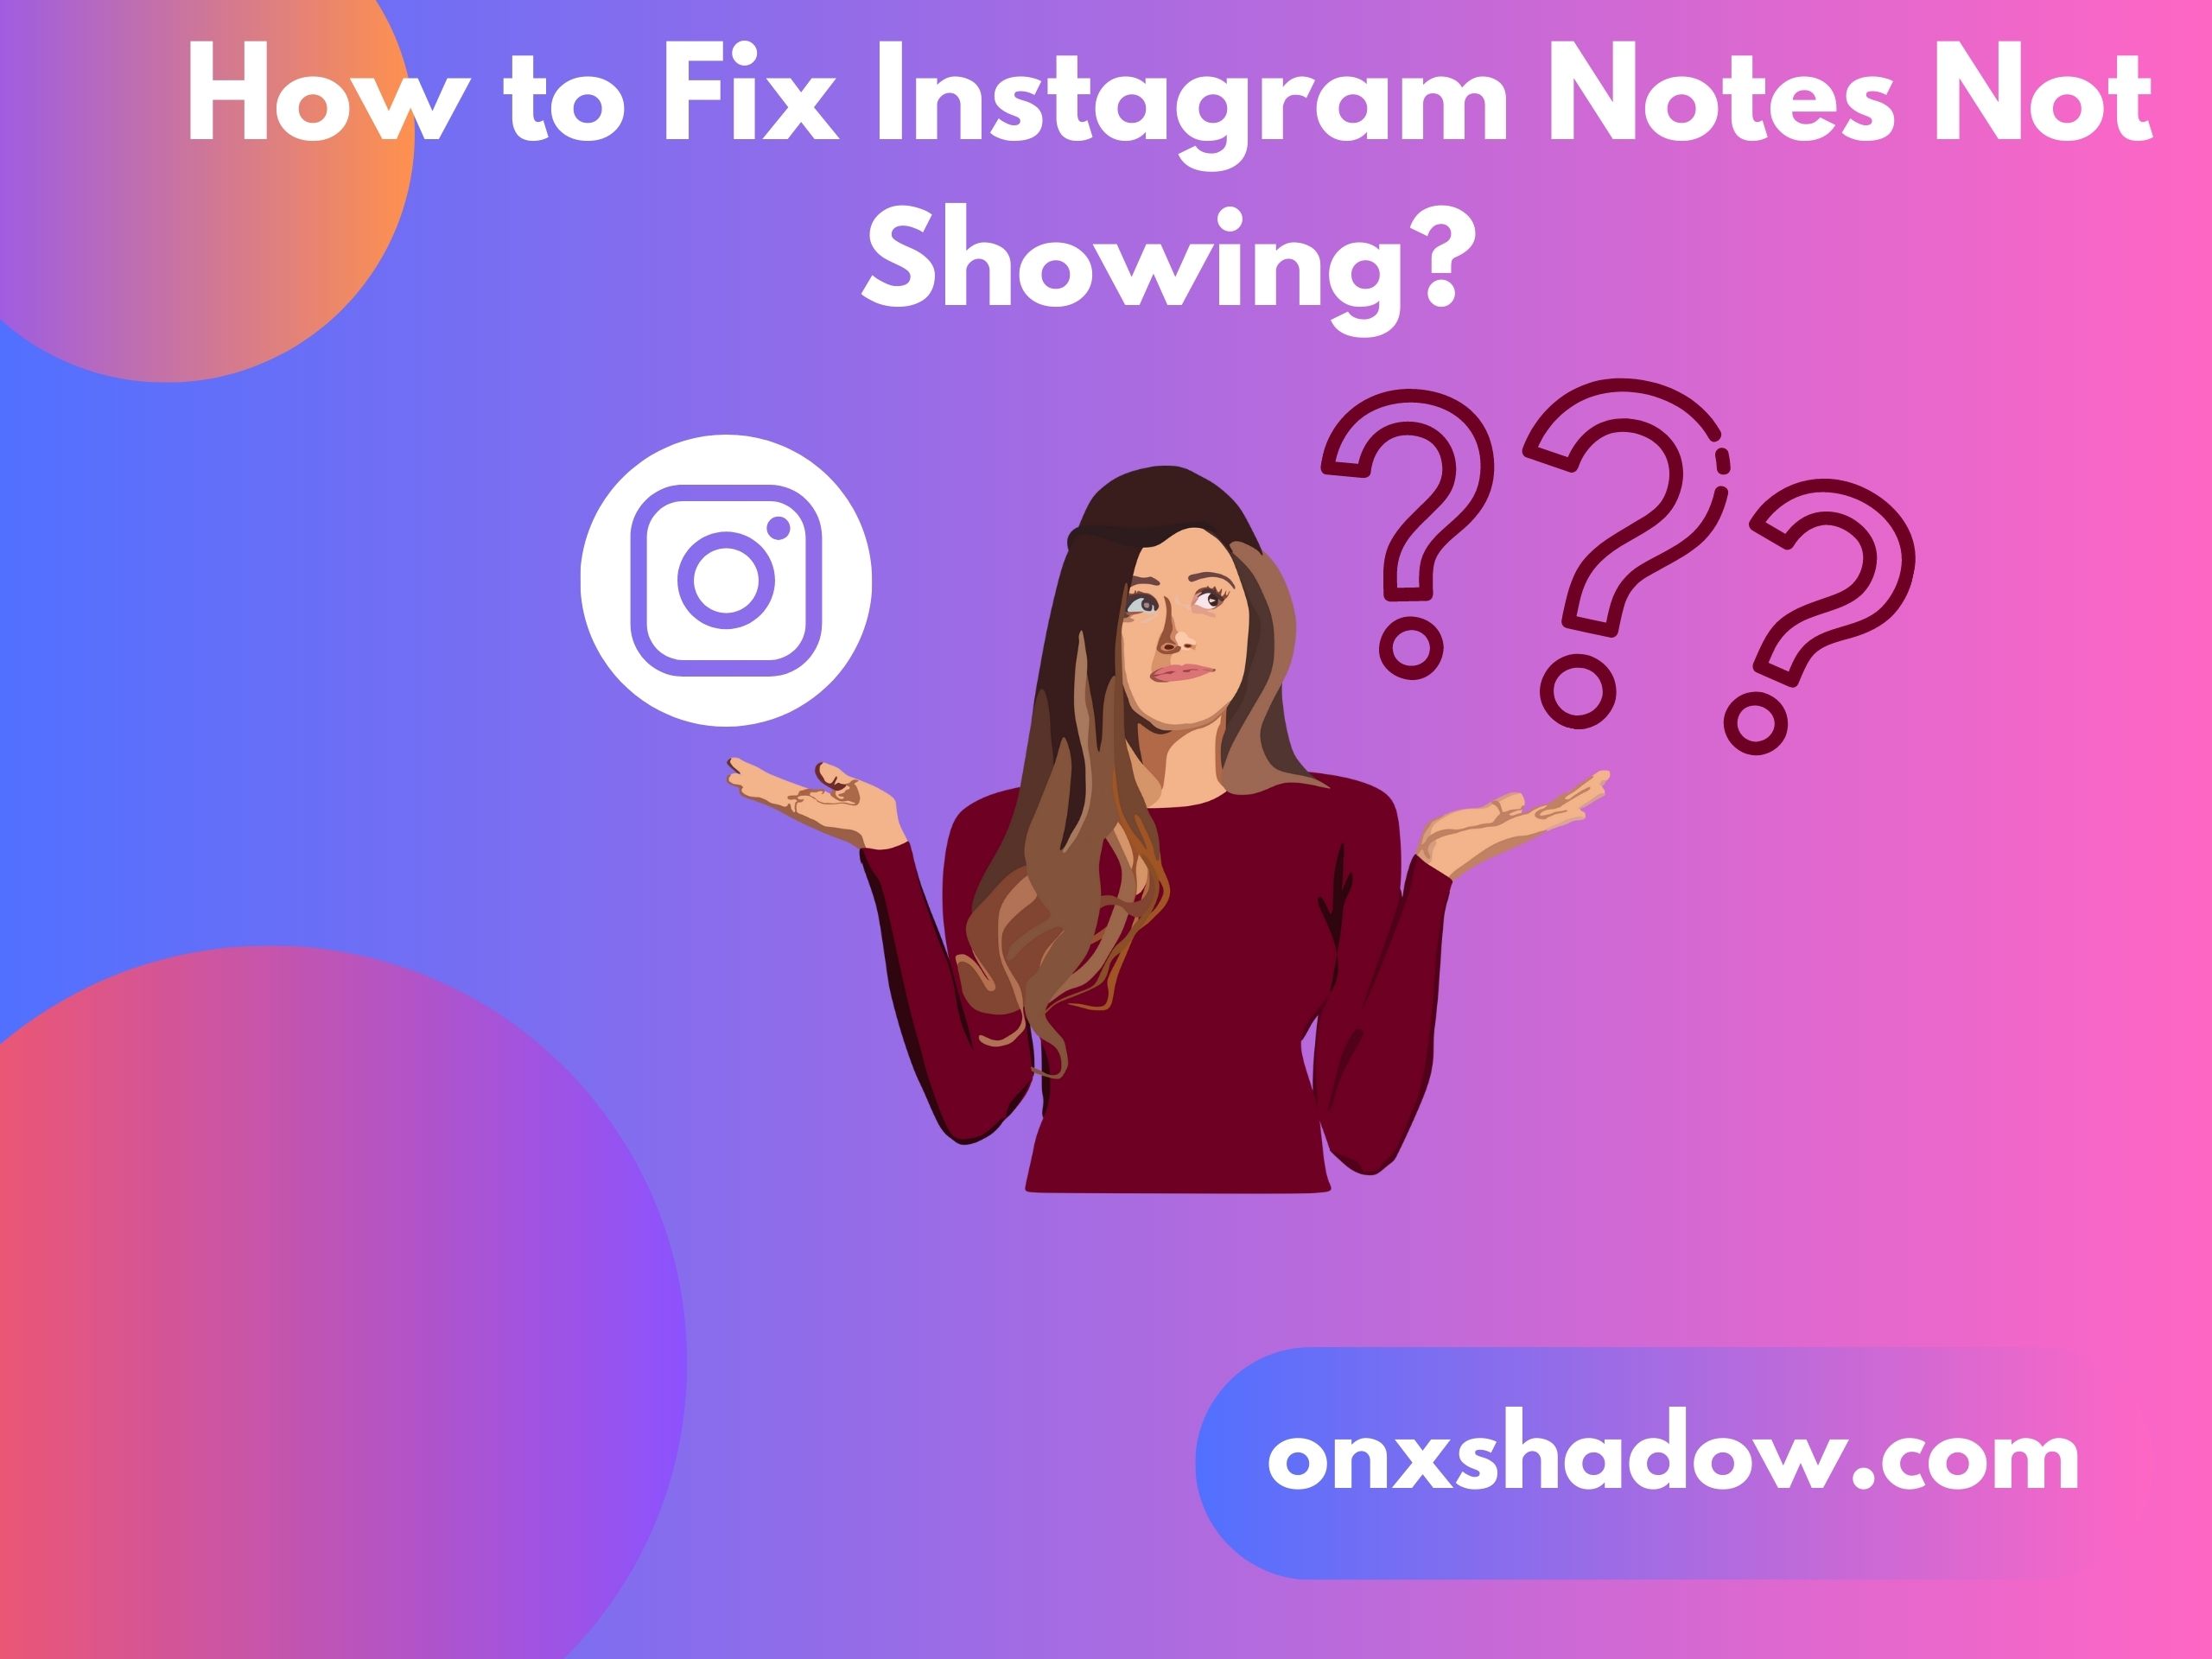 How to Fix Instagram Notes Not Showing?